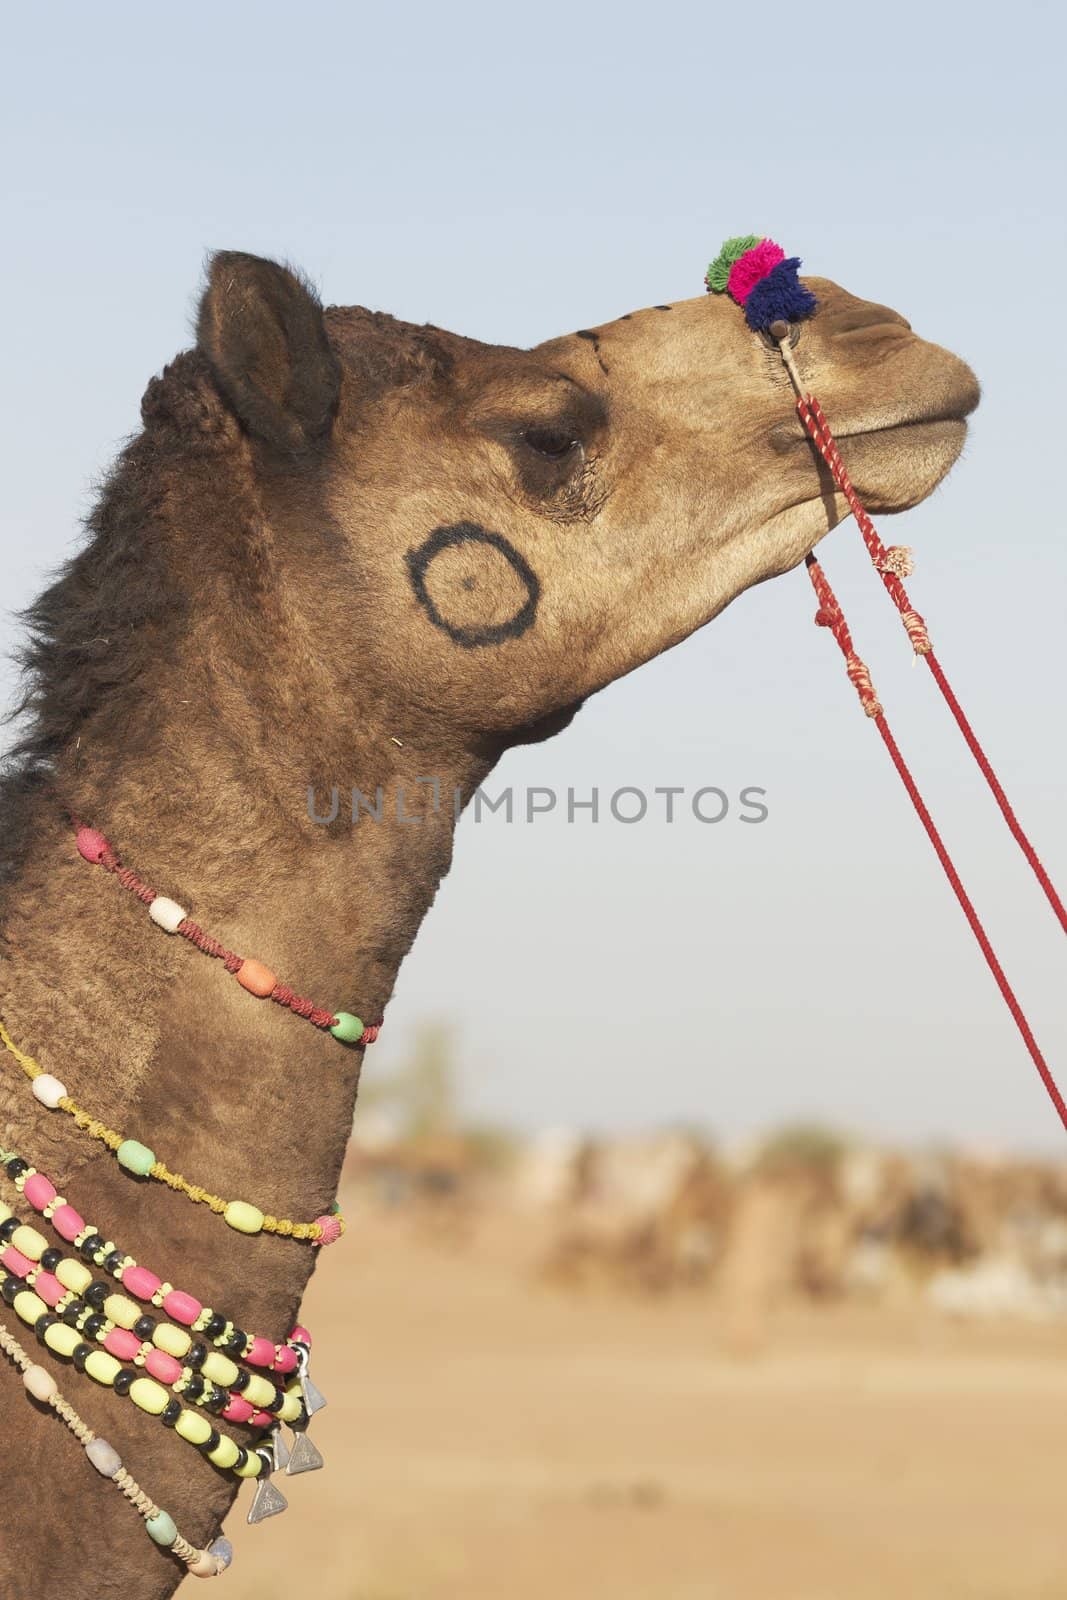 Head and neck of a camel at the Nagaur Cattle Fair in Rajasthan, India